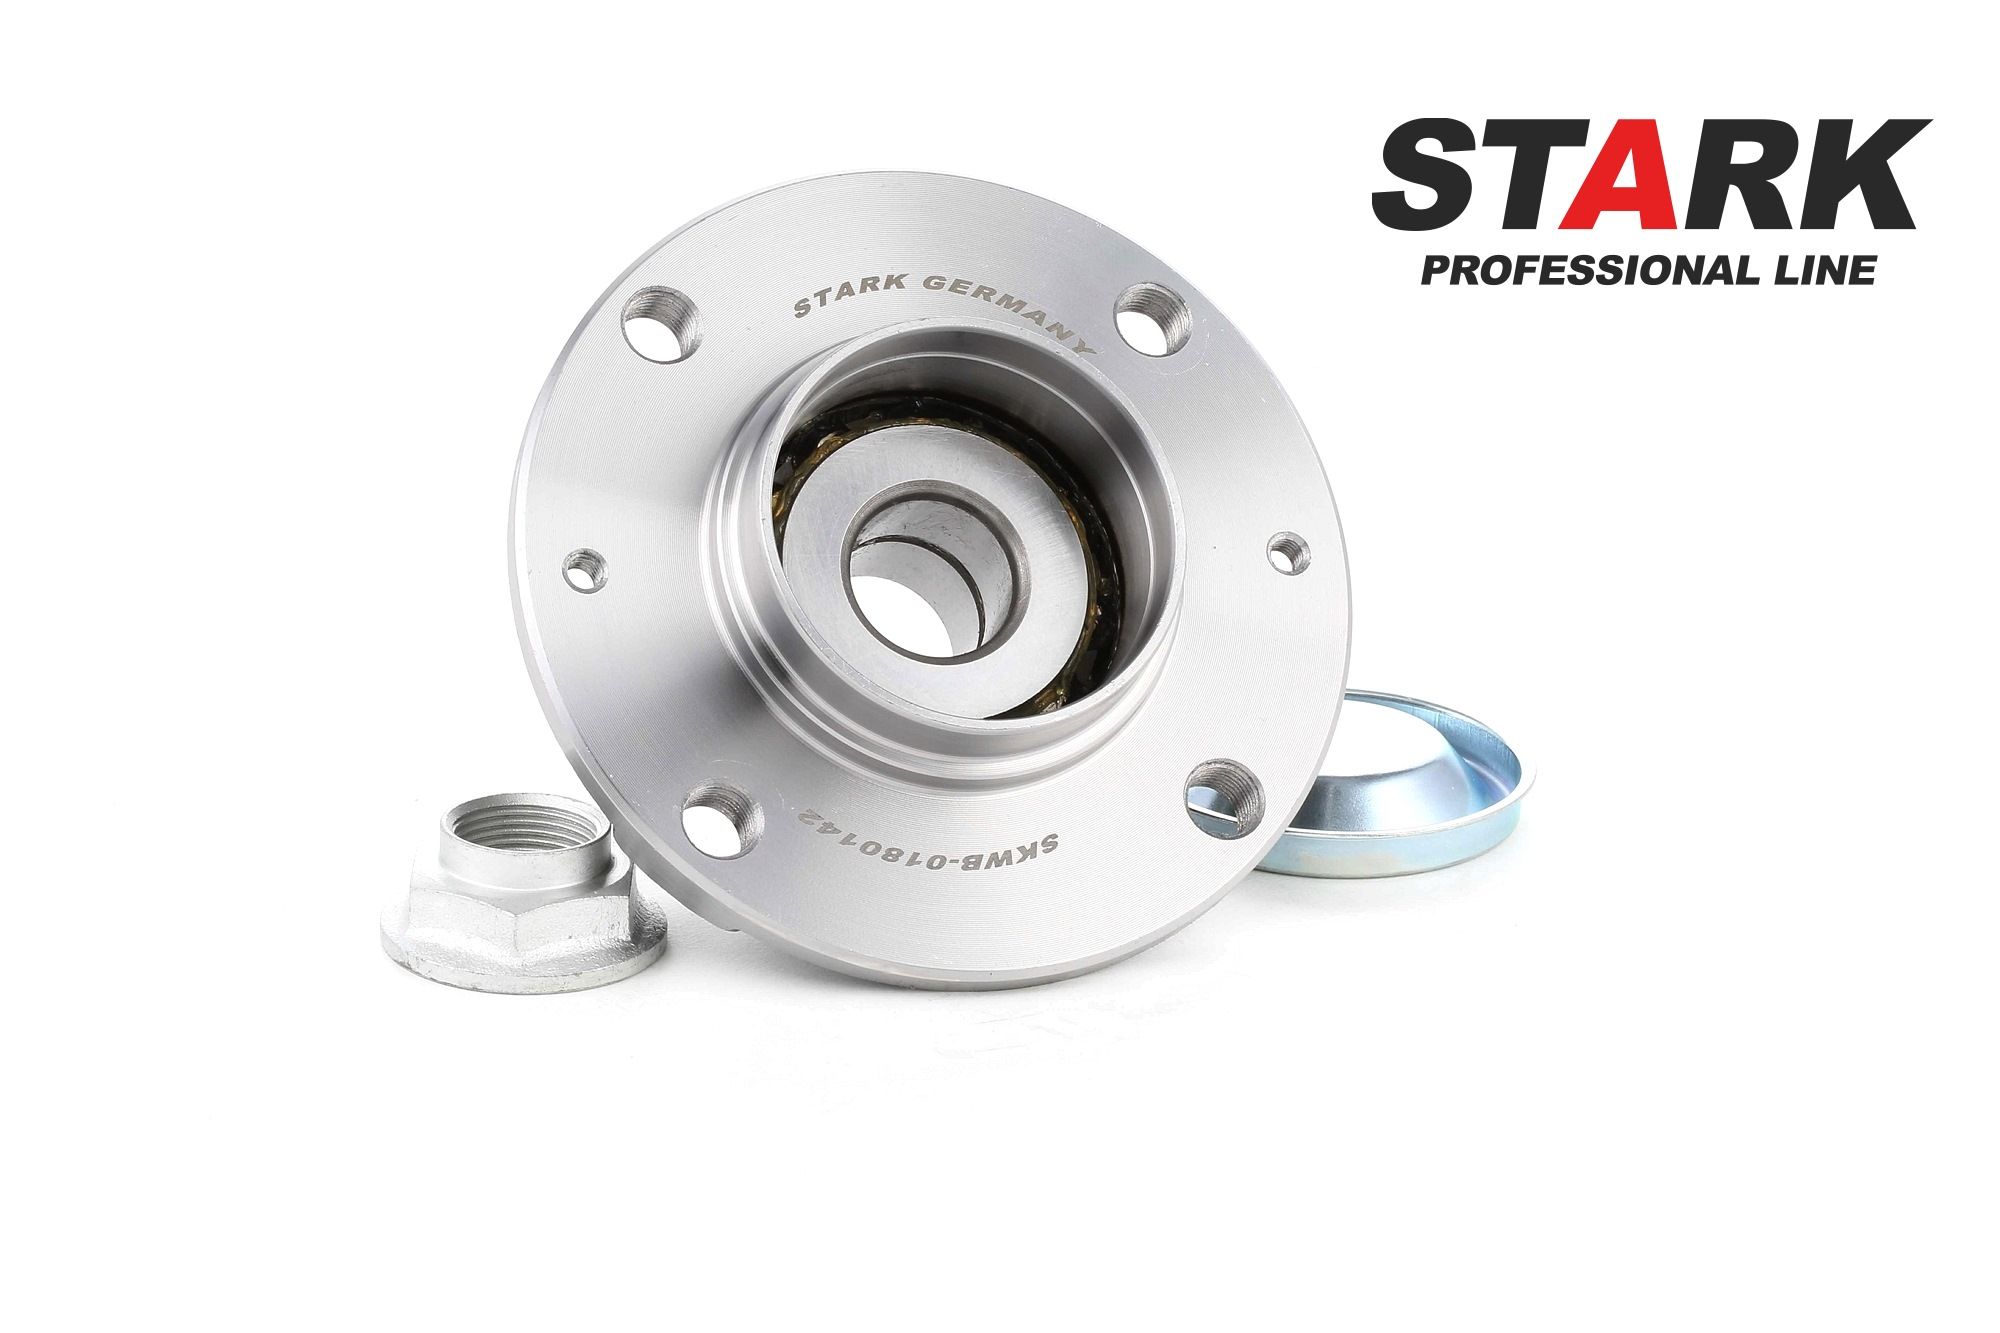 STARK SKWB-0180142 Wheel bearing kit Rear Axle, Left, Right, with integrated magnetic sensor ring, 129 mm